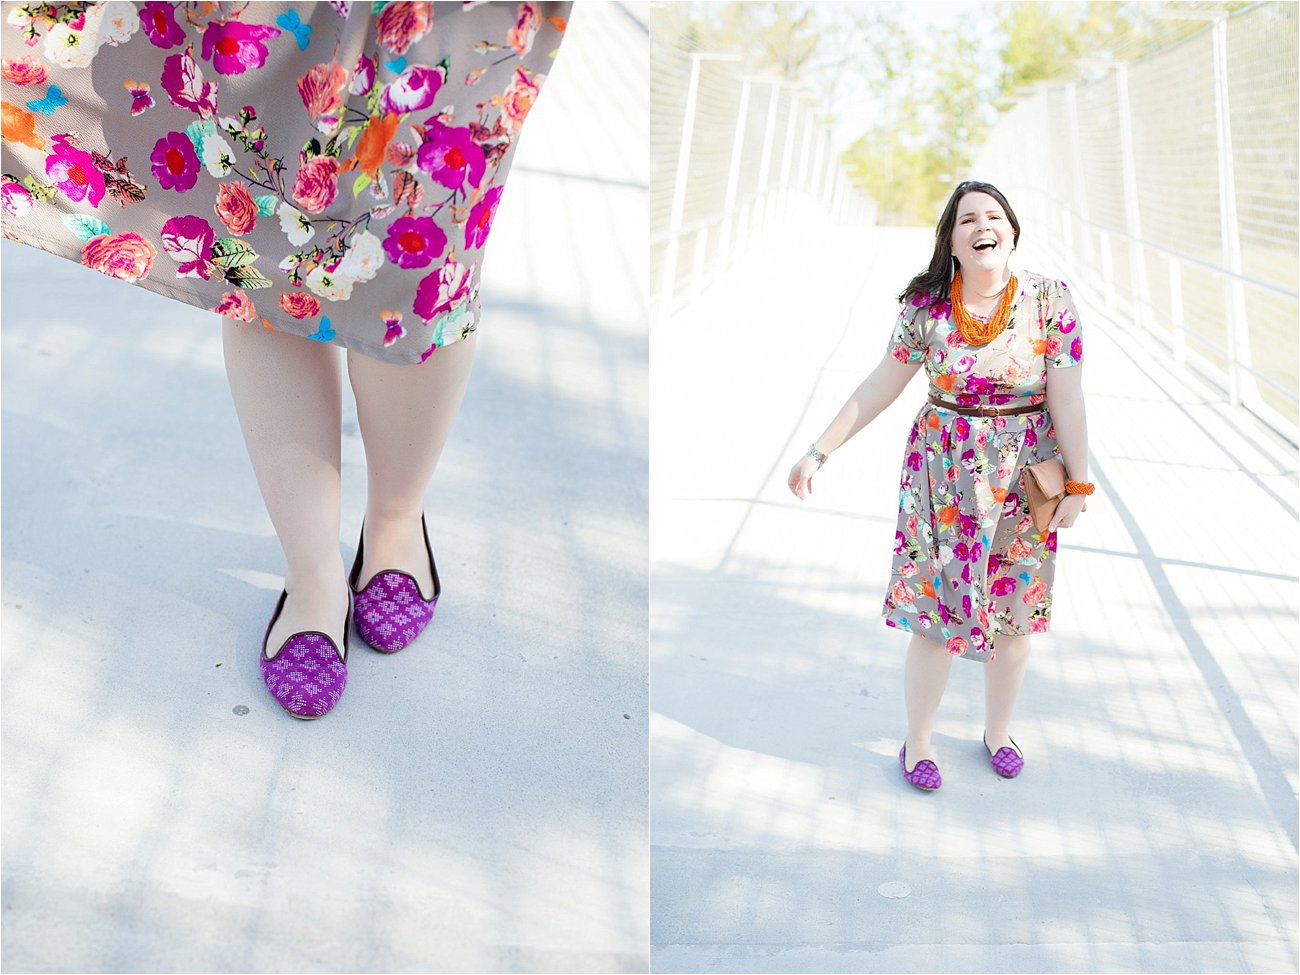 LulaRoe Floral Amelia Dress, The Root Collective Millie Smoking Shoe, Made for Freedom Lily Necklace and Bracelet, Sseko Designs Leather Clutch, Nickel and Suede earrings | Mom Style | North Carolina Fashion & Style Blogger (5)